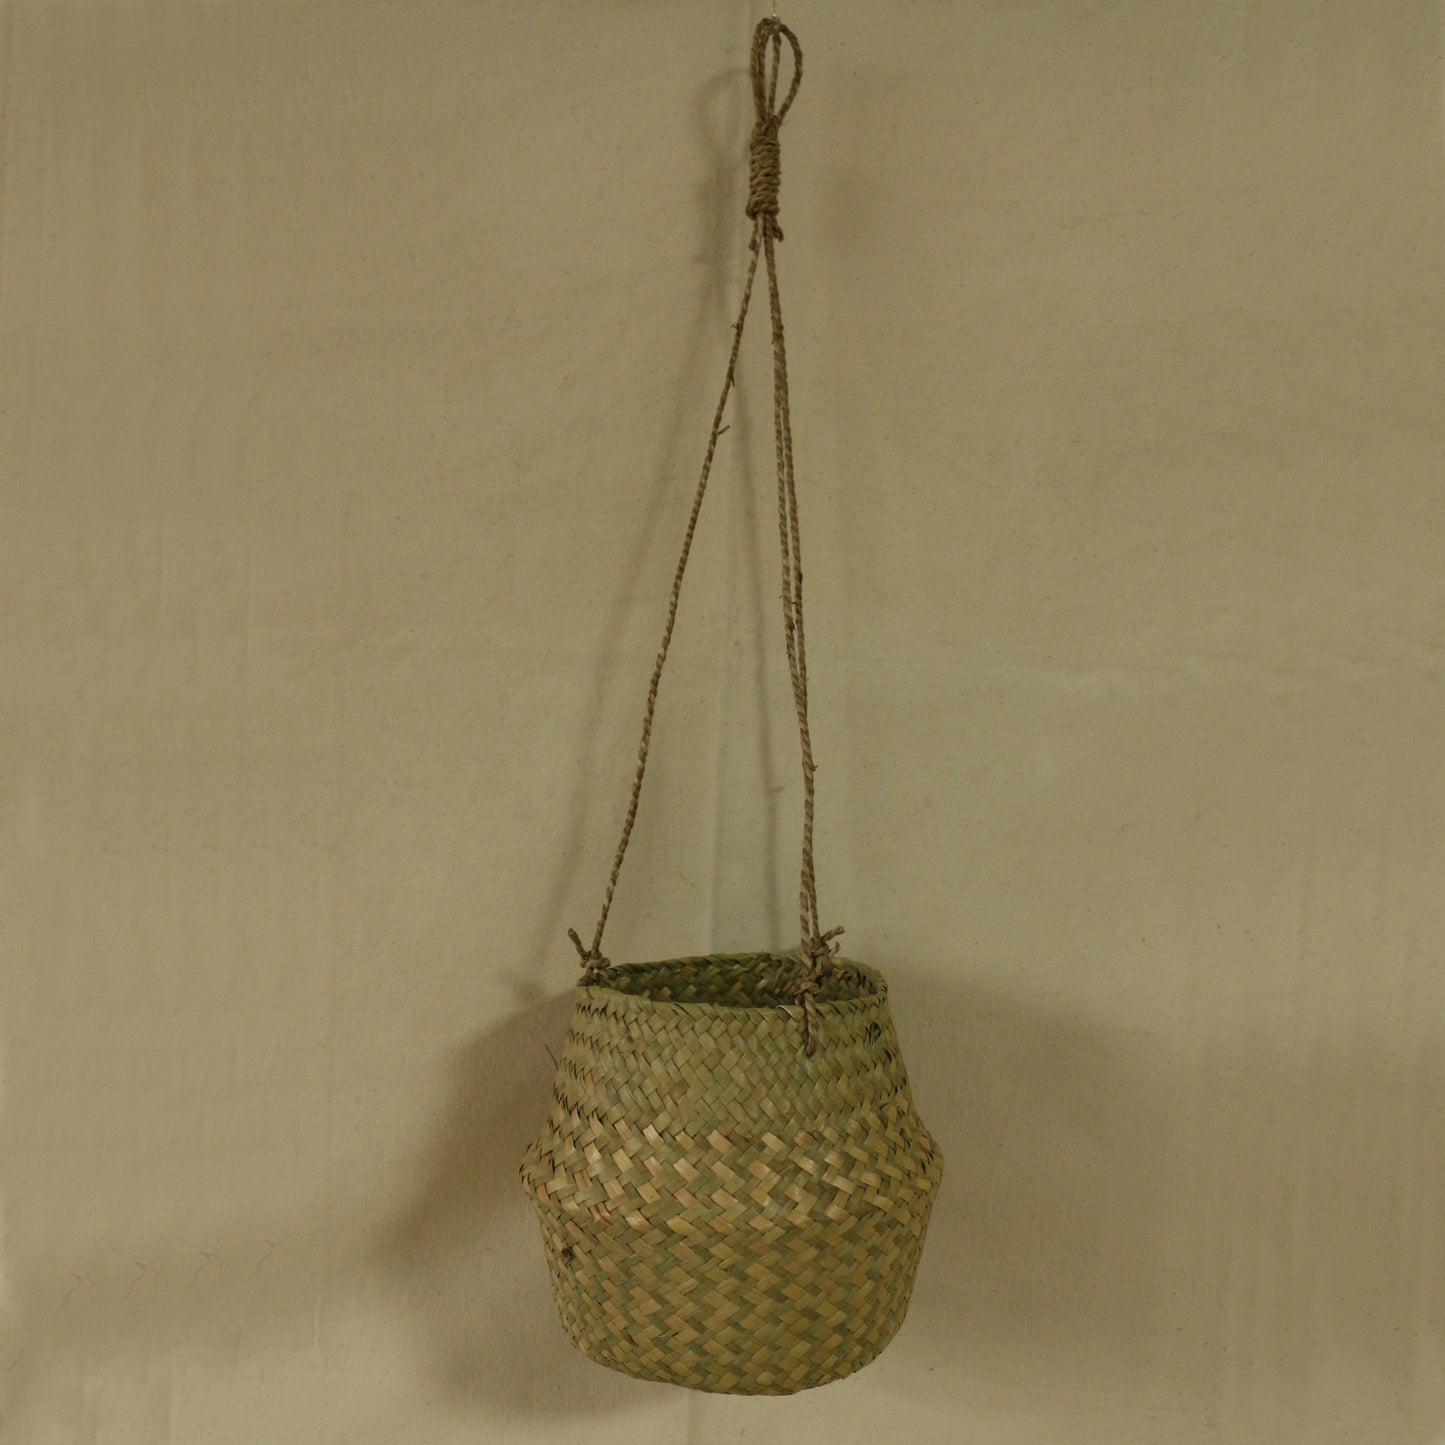 Round Hanging Basket, Hand-Woven Seagrass Belly Planter for Flowers and Plants, Indoor/Outdoor Décor, Dia. 8 X 9 Inch